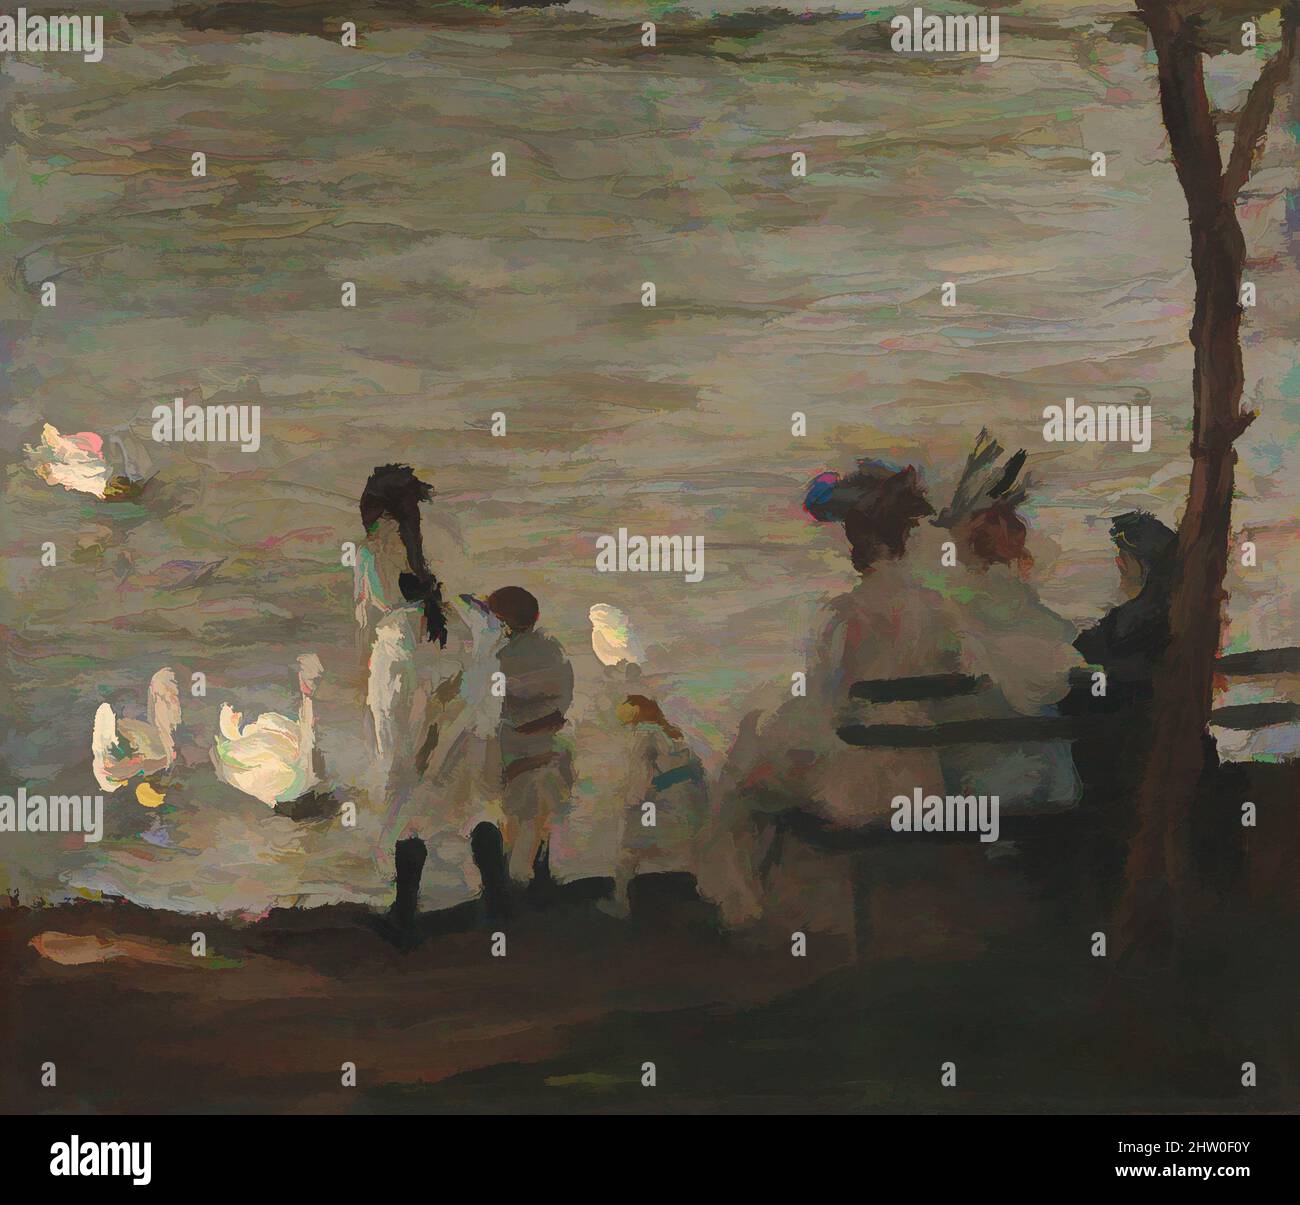 Art inspired by Swans in Central Park, 1906, Oil on canvas, 18 3/8 x 21 3/8 in. (46.7 x 54.3 cm), Paintings, George Bellows (American, Columbus, Ohio 1882–1925 New York), Having given up his studies at Ohio State University after three years, Bellows arrived in New York in 1904. Under, Classic works modernized by Artotop with a splash of modernity. Shapes, color and value, eye-catching visual impact on art. Emotions through freedom of artworks in a contemporary way. A timeless message pursuing a wildly creative new direction. Artists turning to the digital medium and creating the Artotop NFT Stock Photo